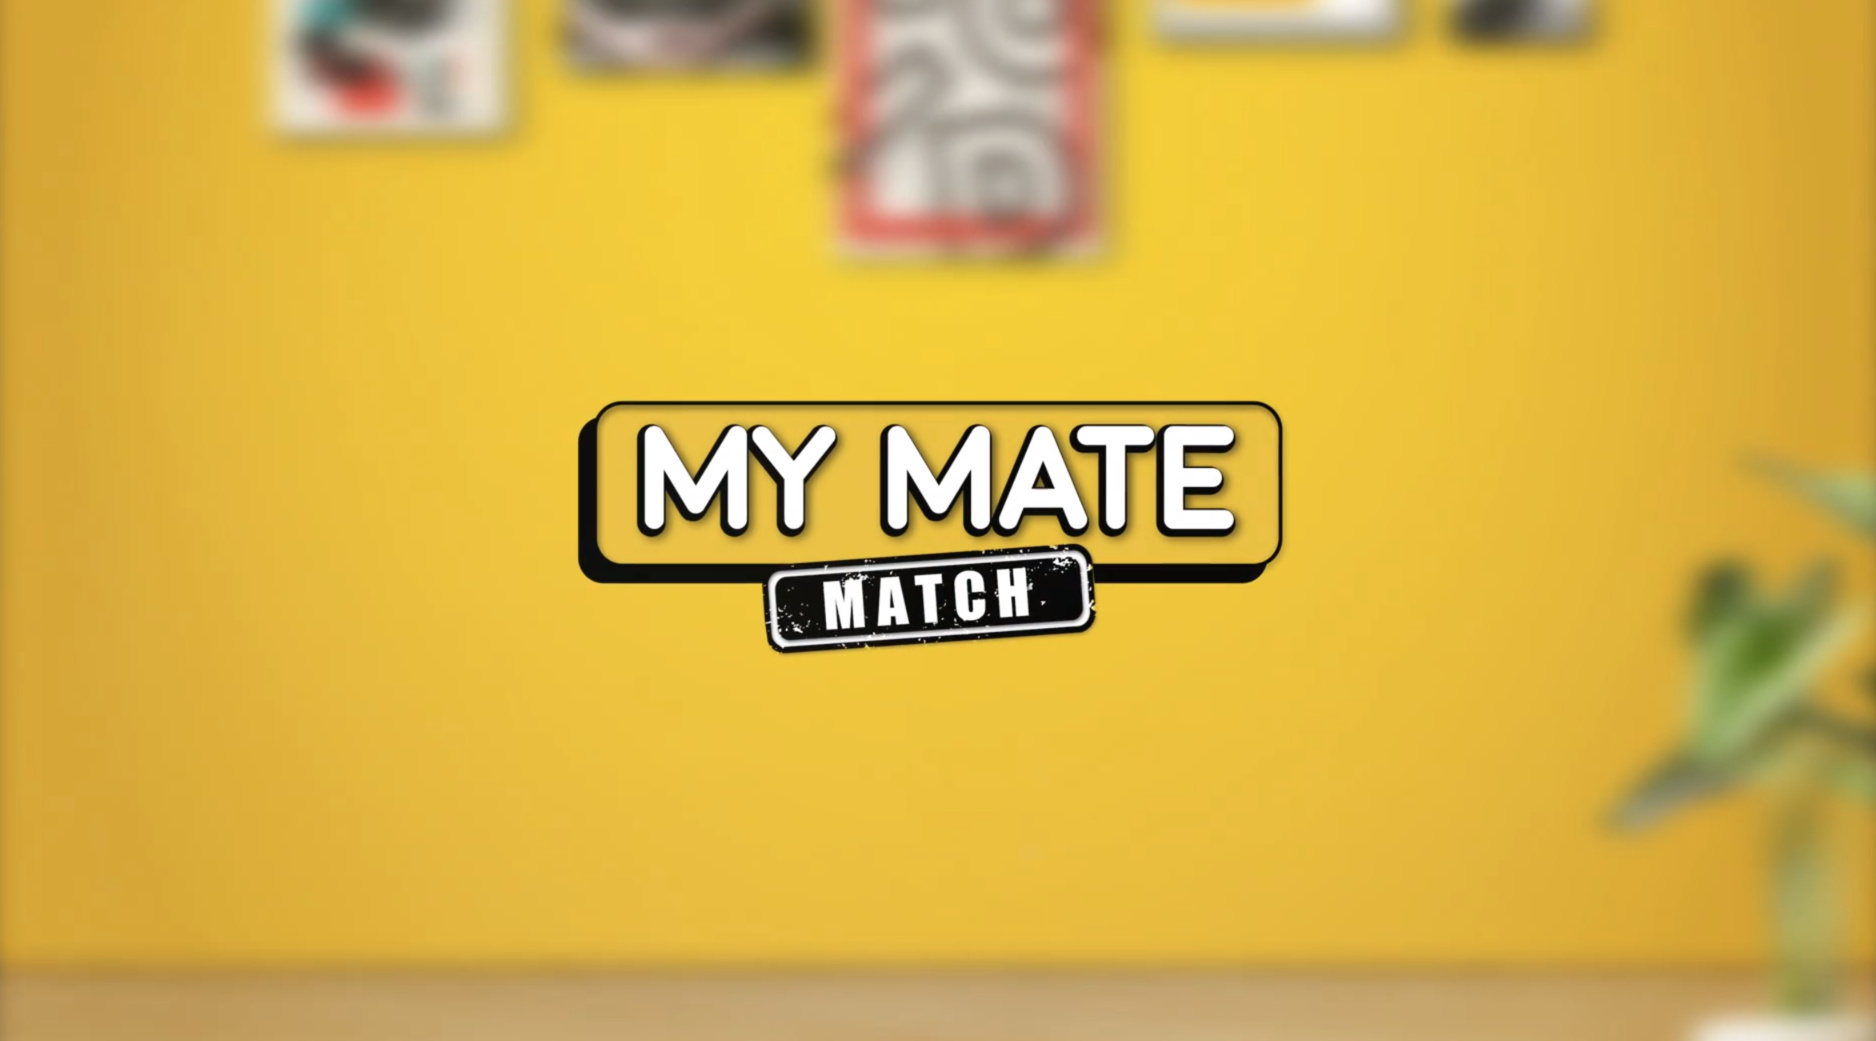 The series mate match my My Mate